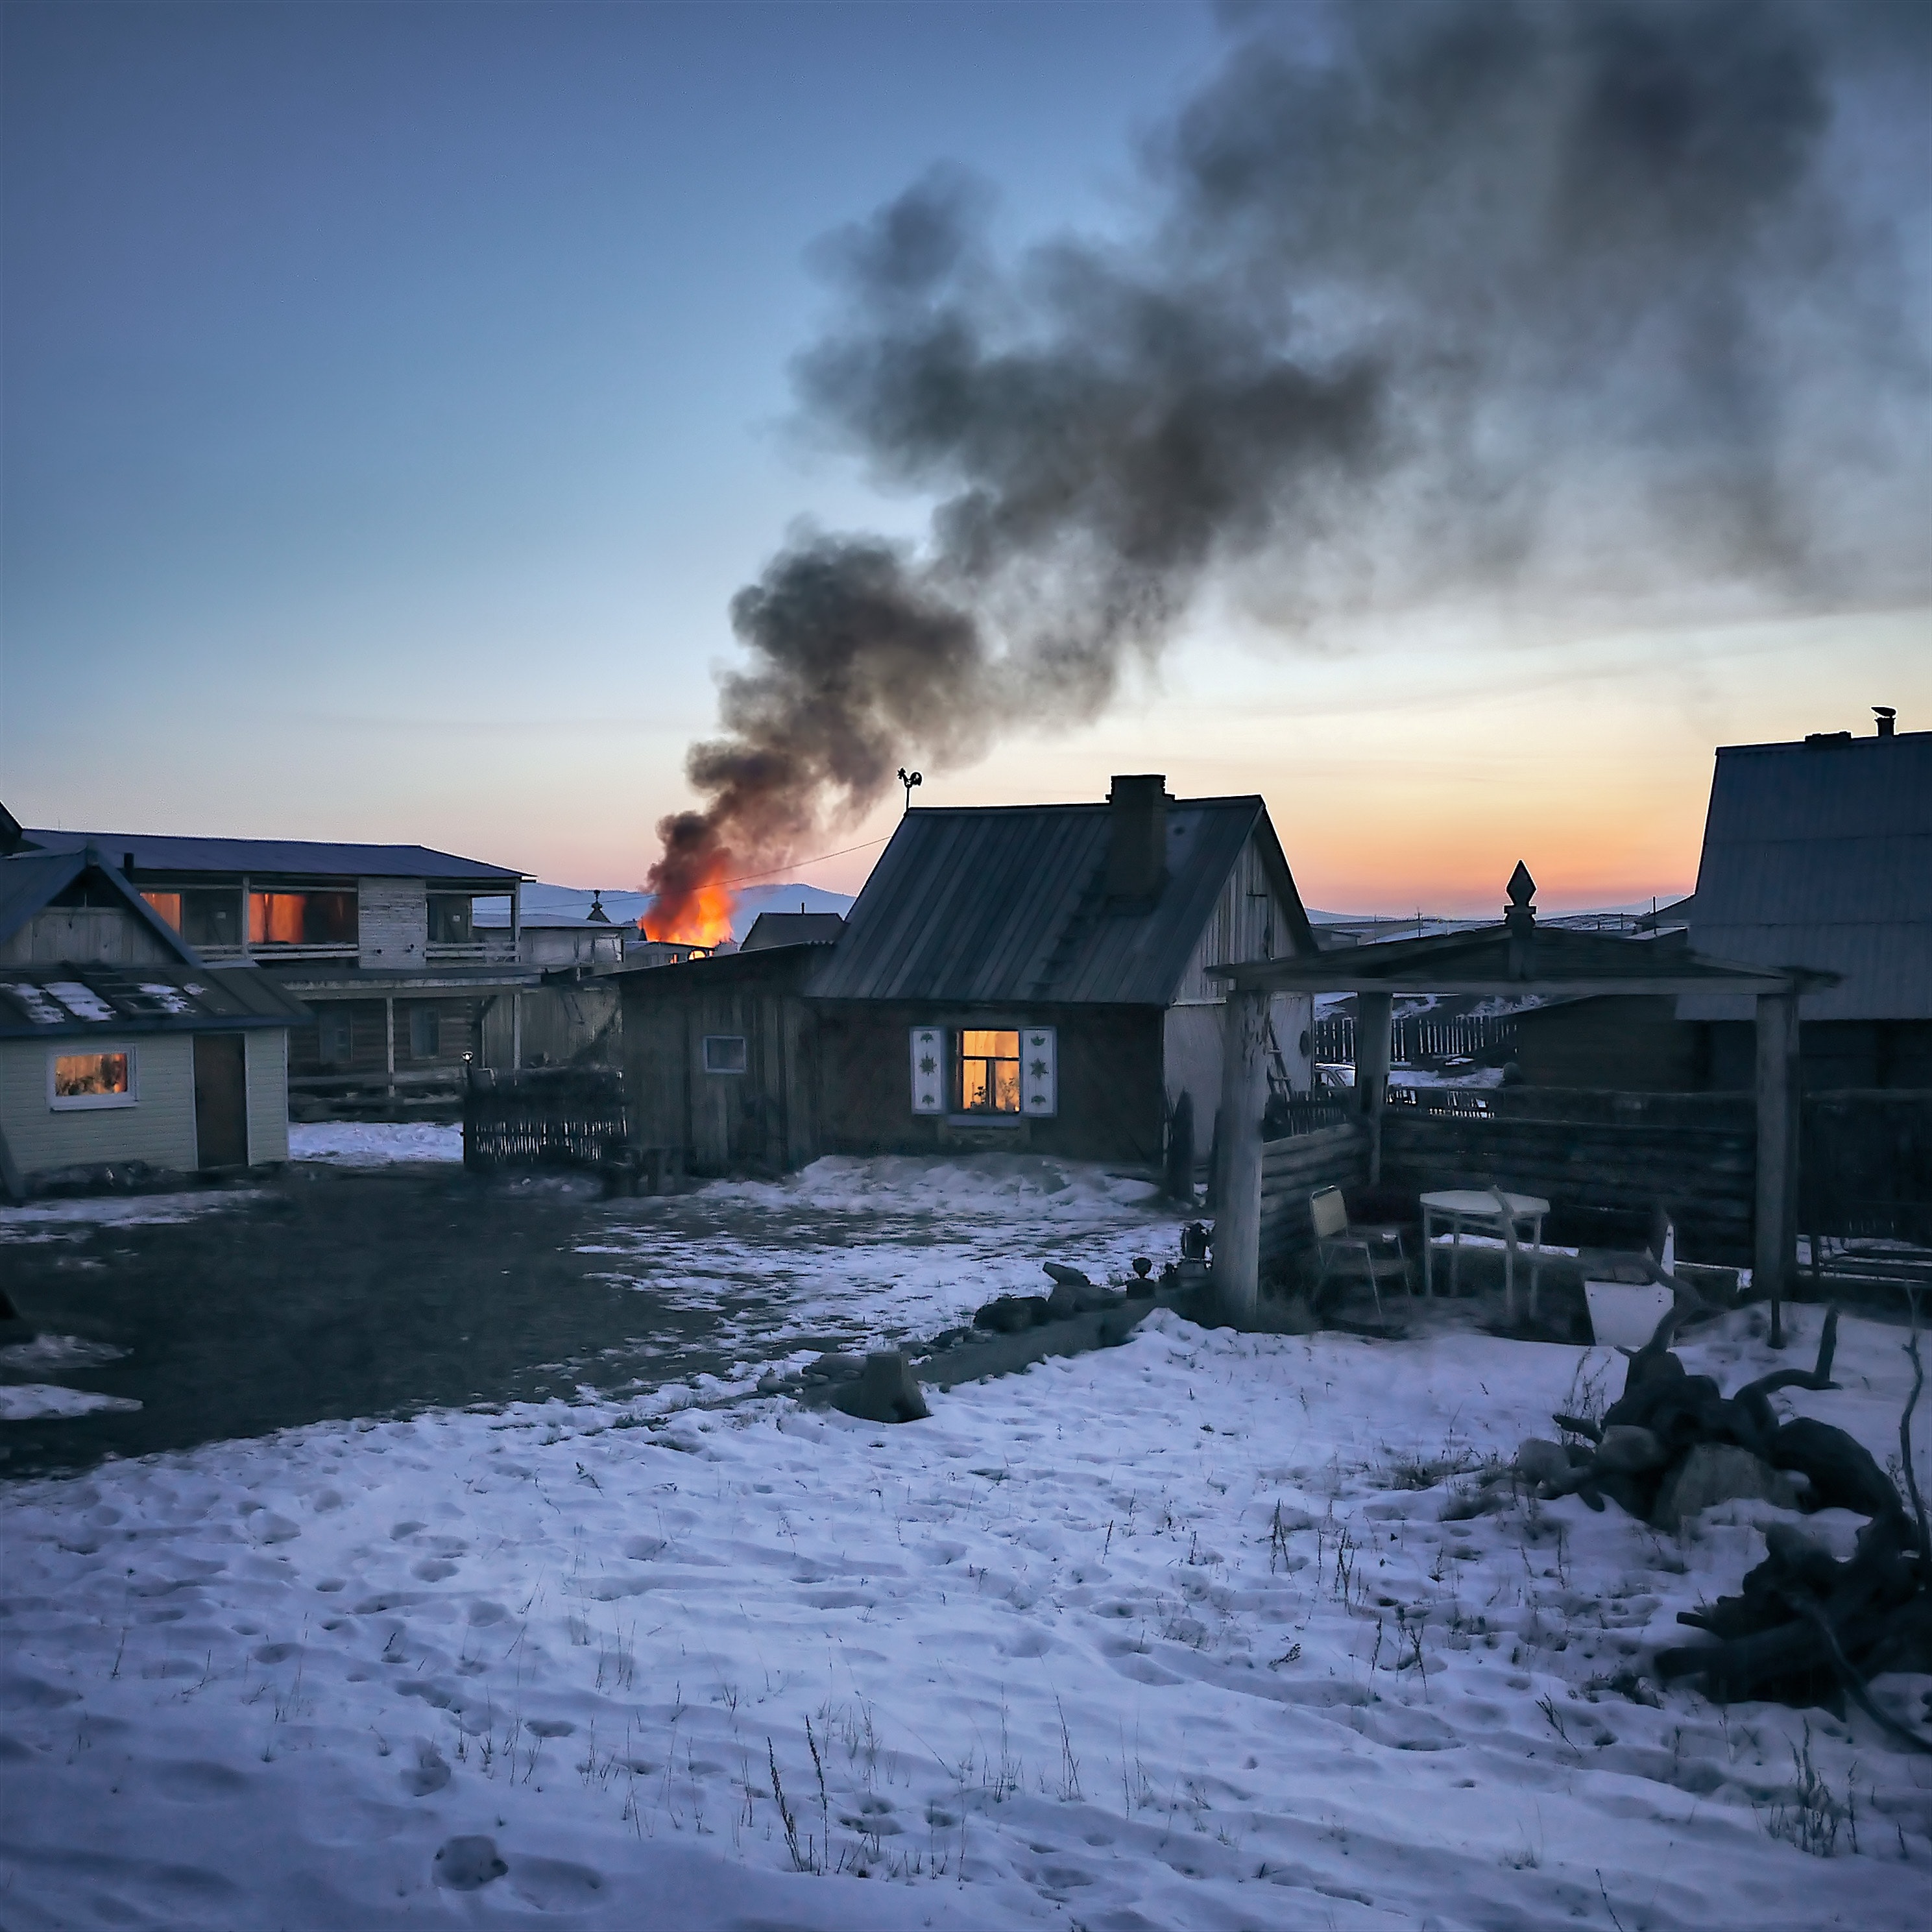 Gray Wooden House Burning, Accident, Light, Wooden cabin, Winter, HQ Photo